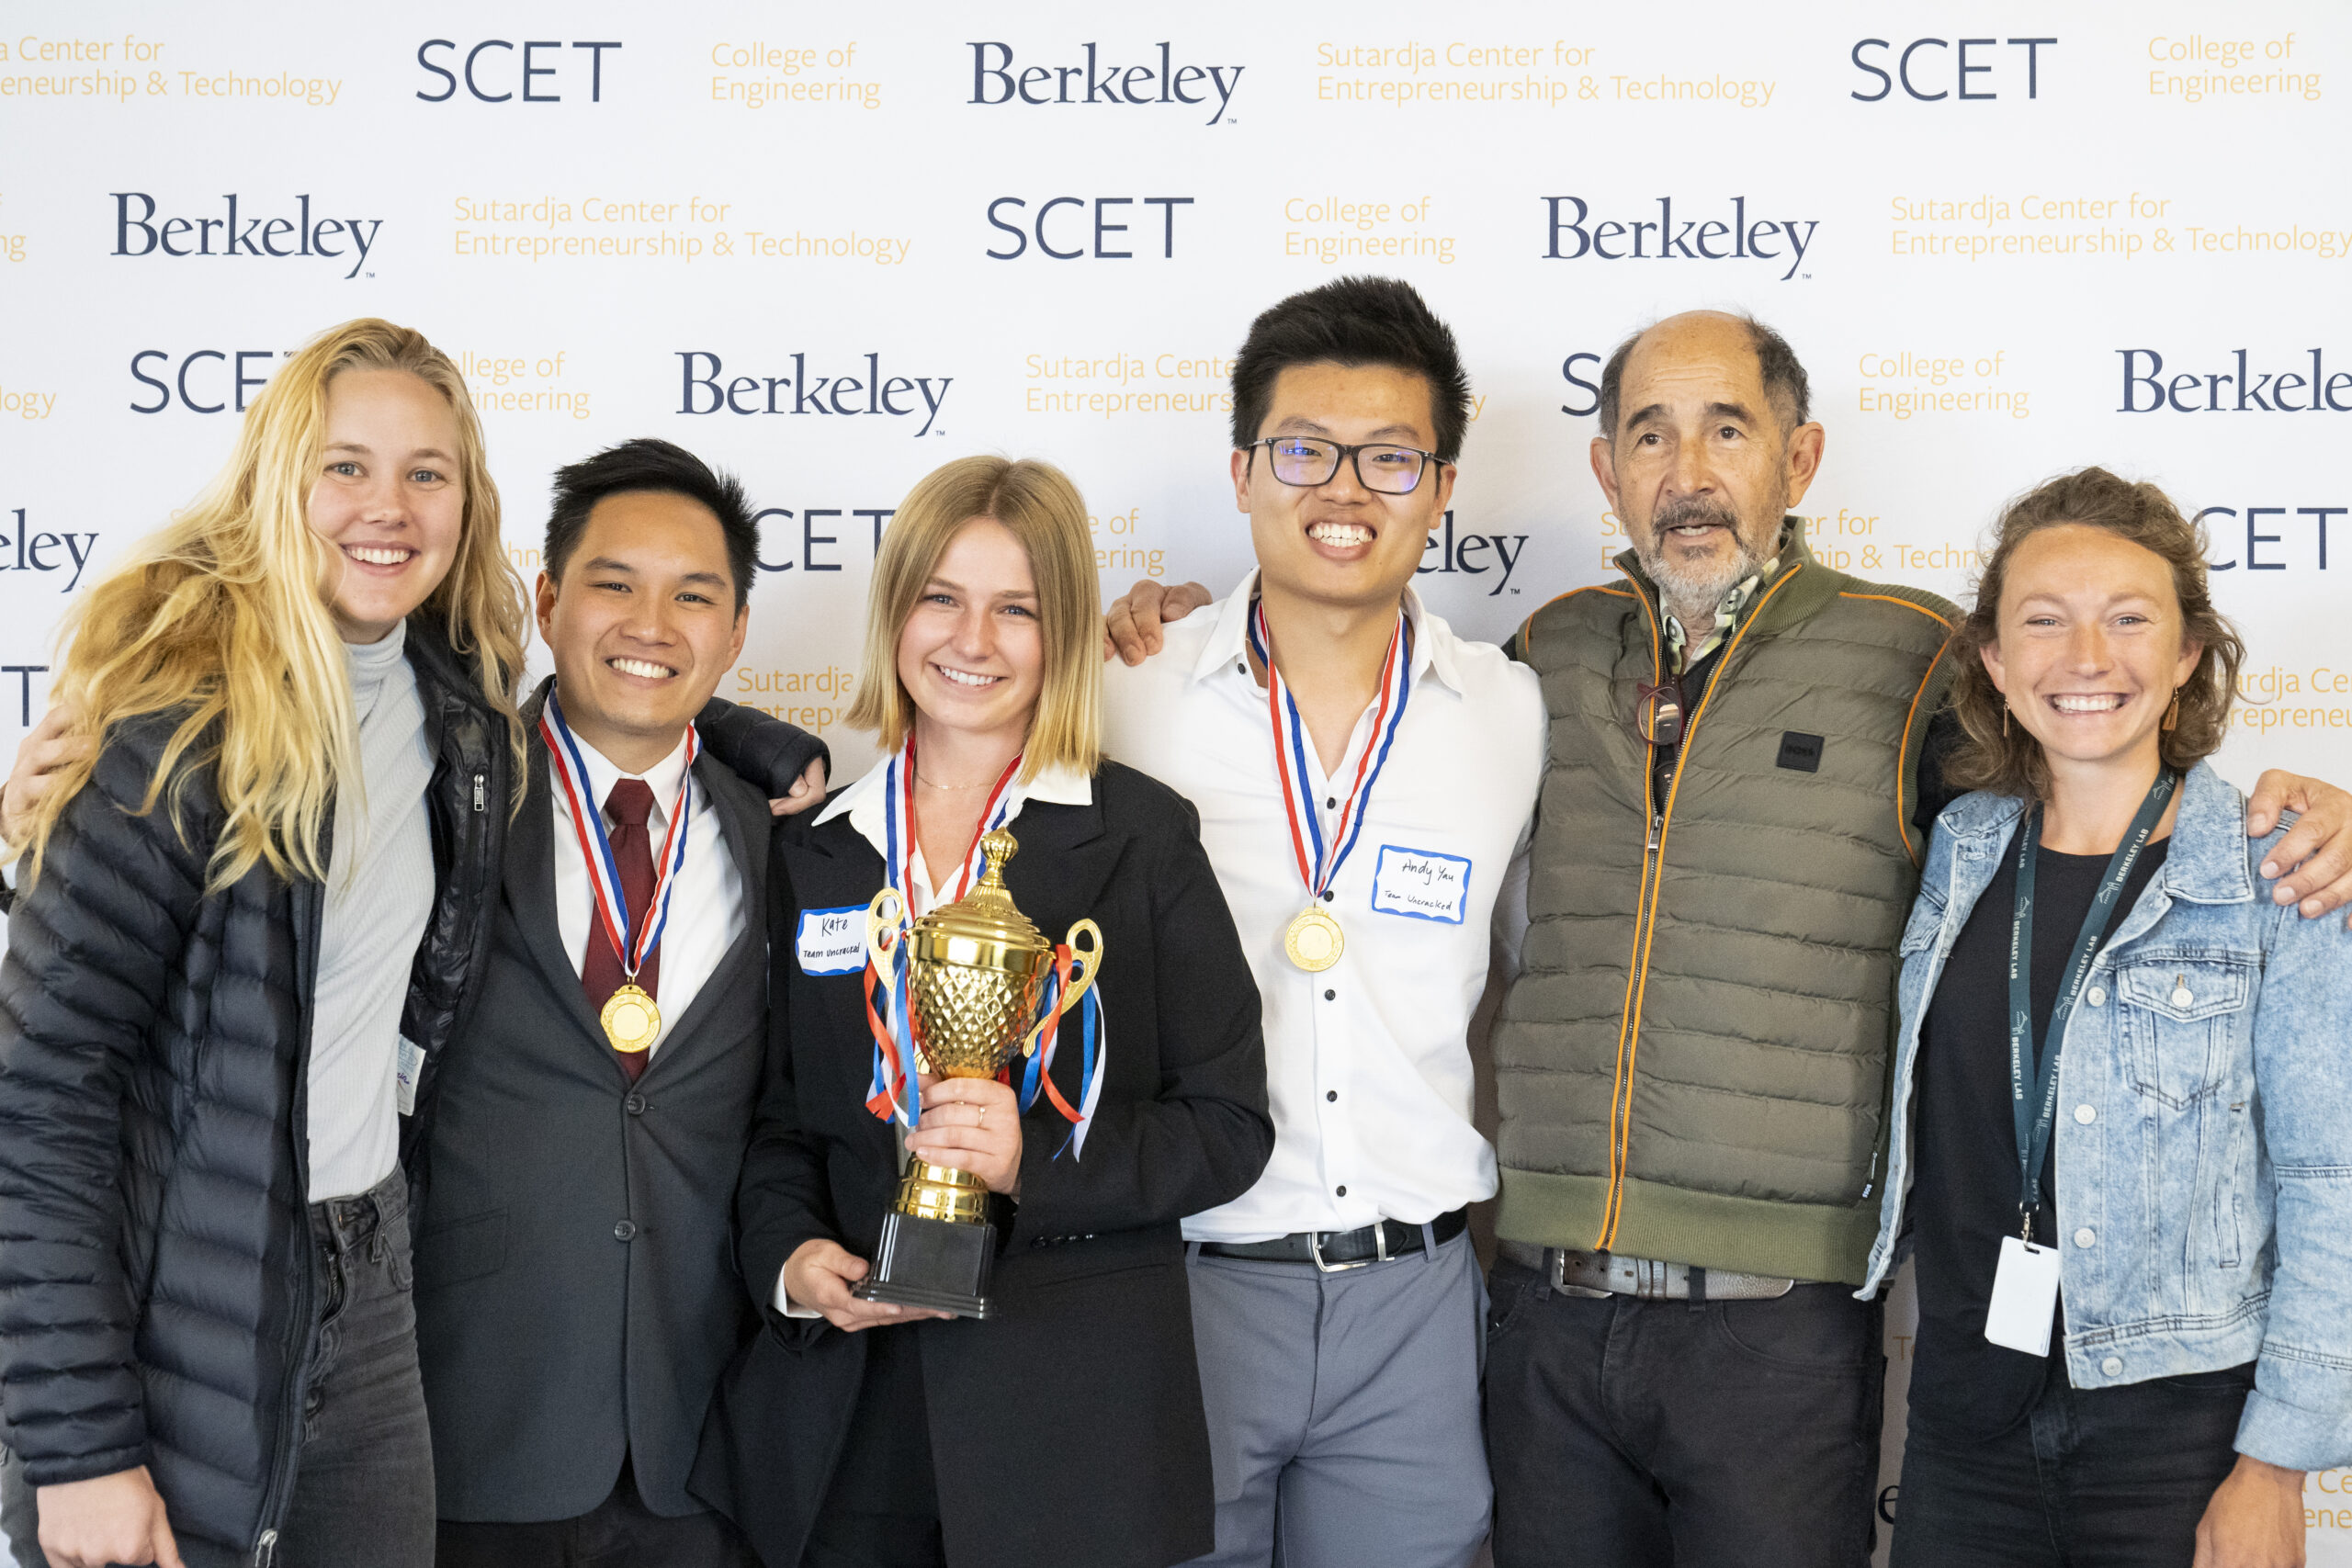 Sutardja Center for Entrepreneurship and Technology’s Collider Cup XII at UC Berkeley’s Sibley Auditorium in Berkeley, Calif. on Friday, May 5, 2023. (Photo by Adam Lau/Berkeley Engineering)